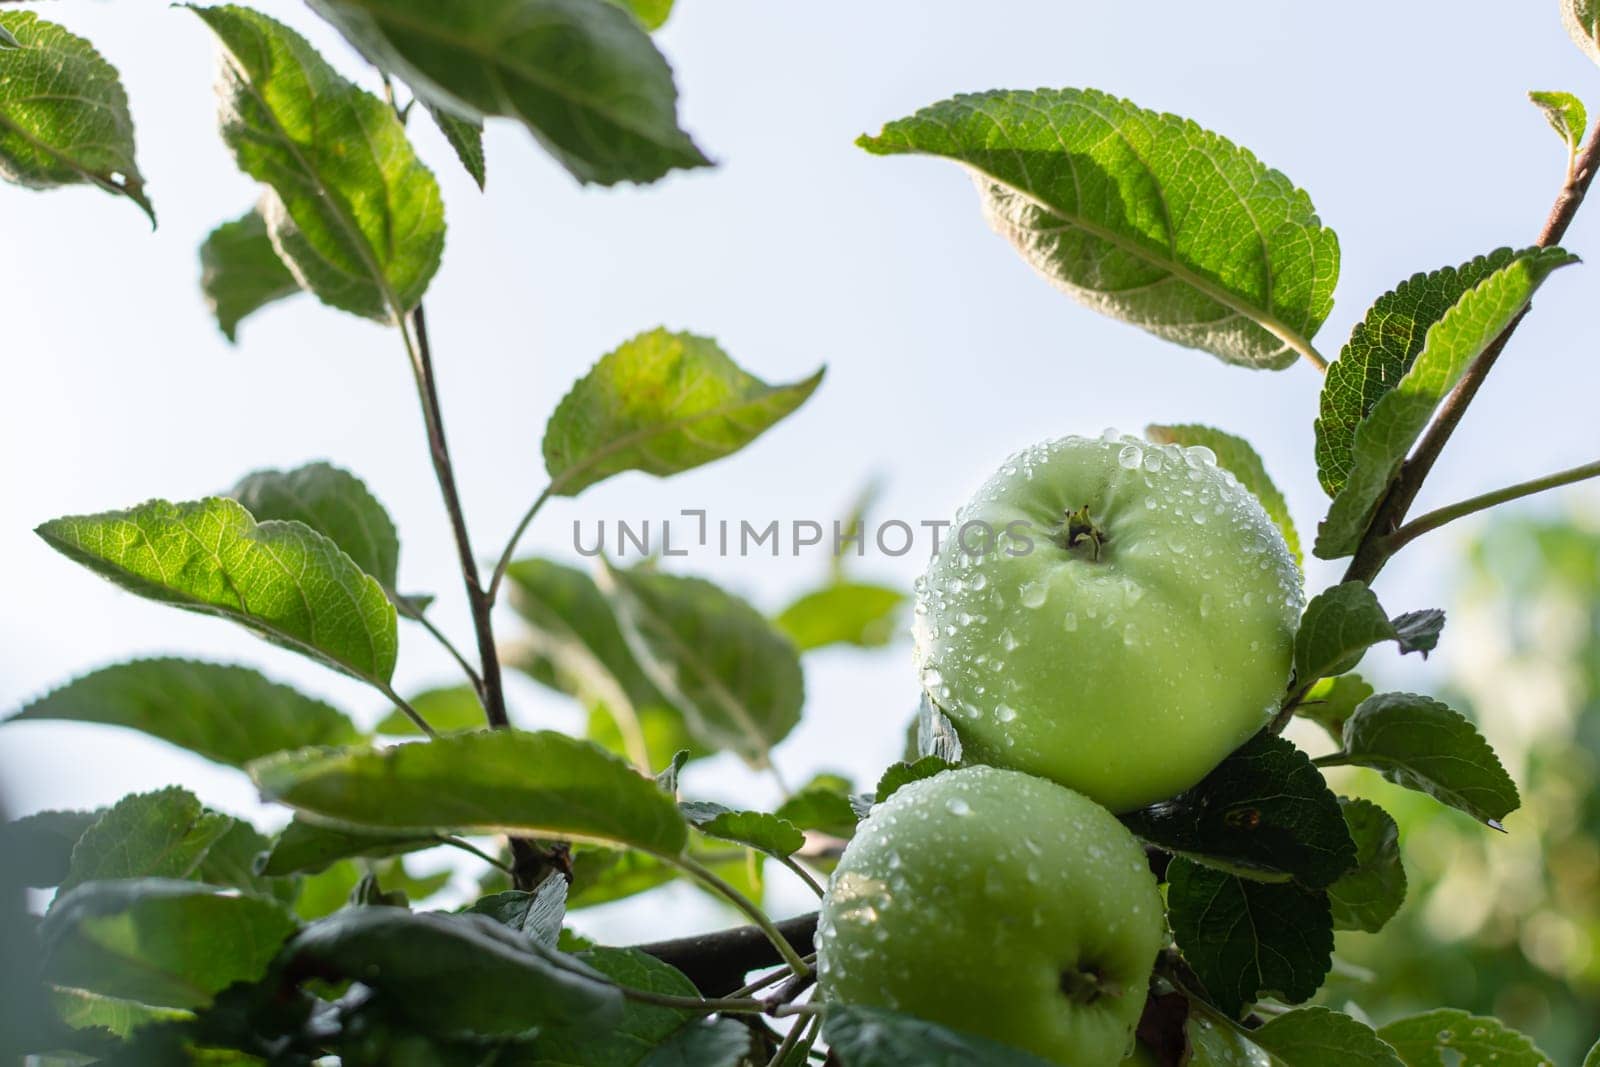 Ripening wet apples in raindrops on a branch in the garden against the sky. Gardening.